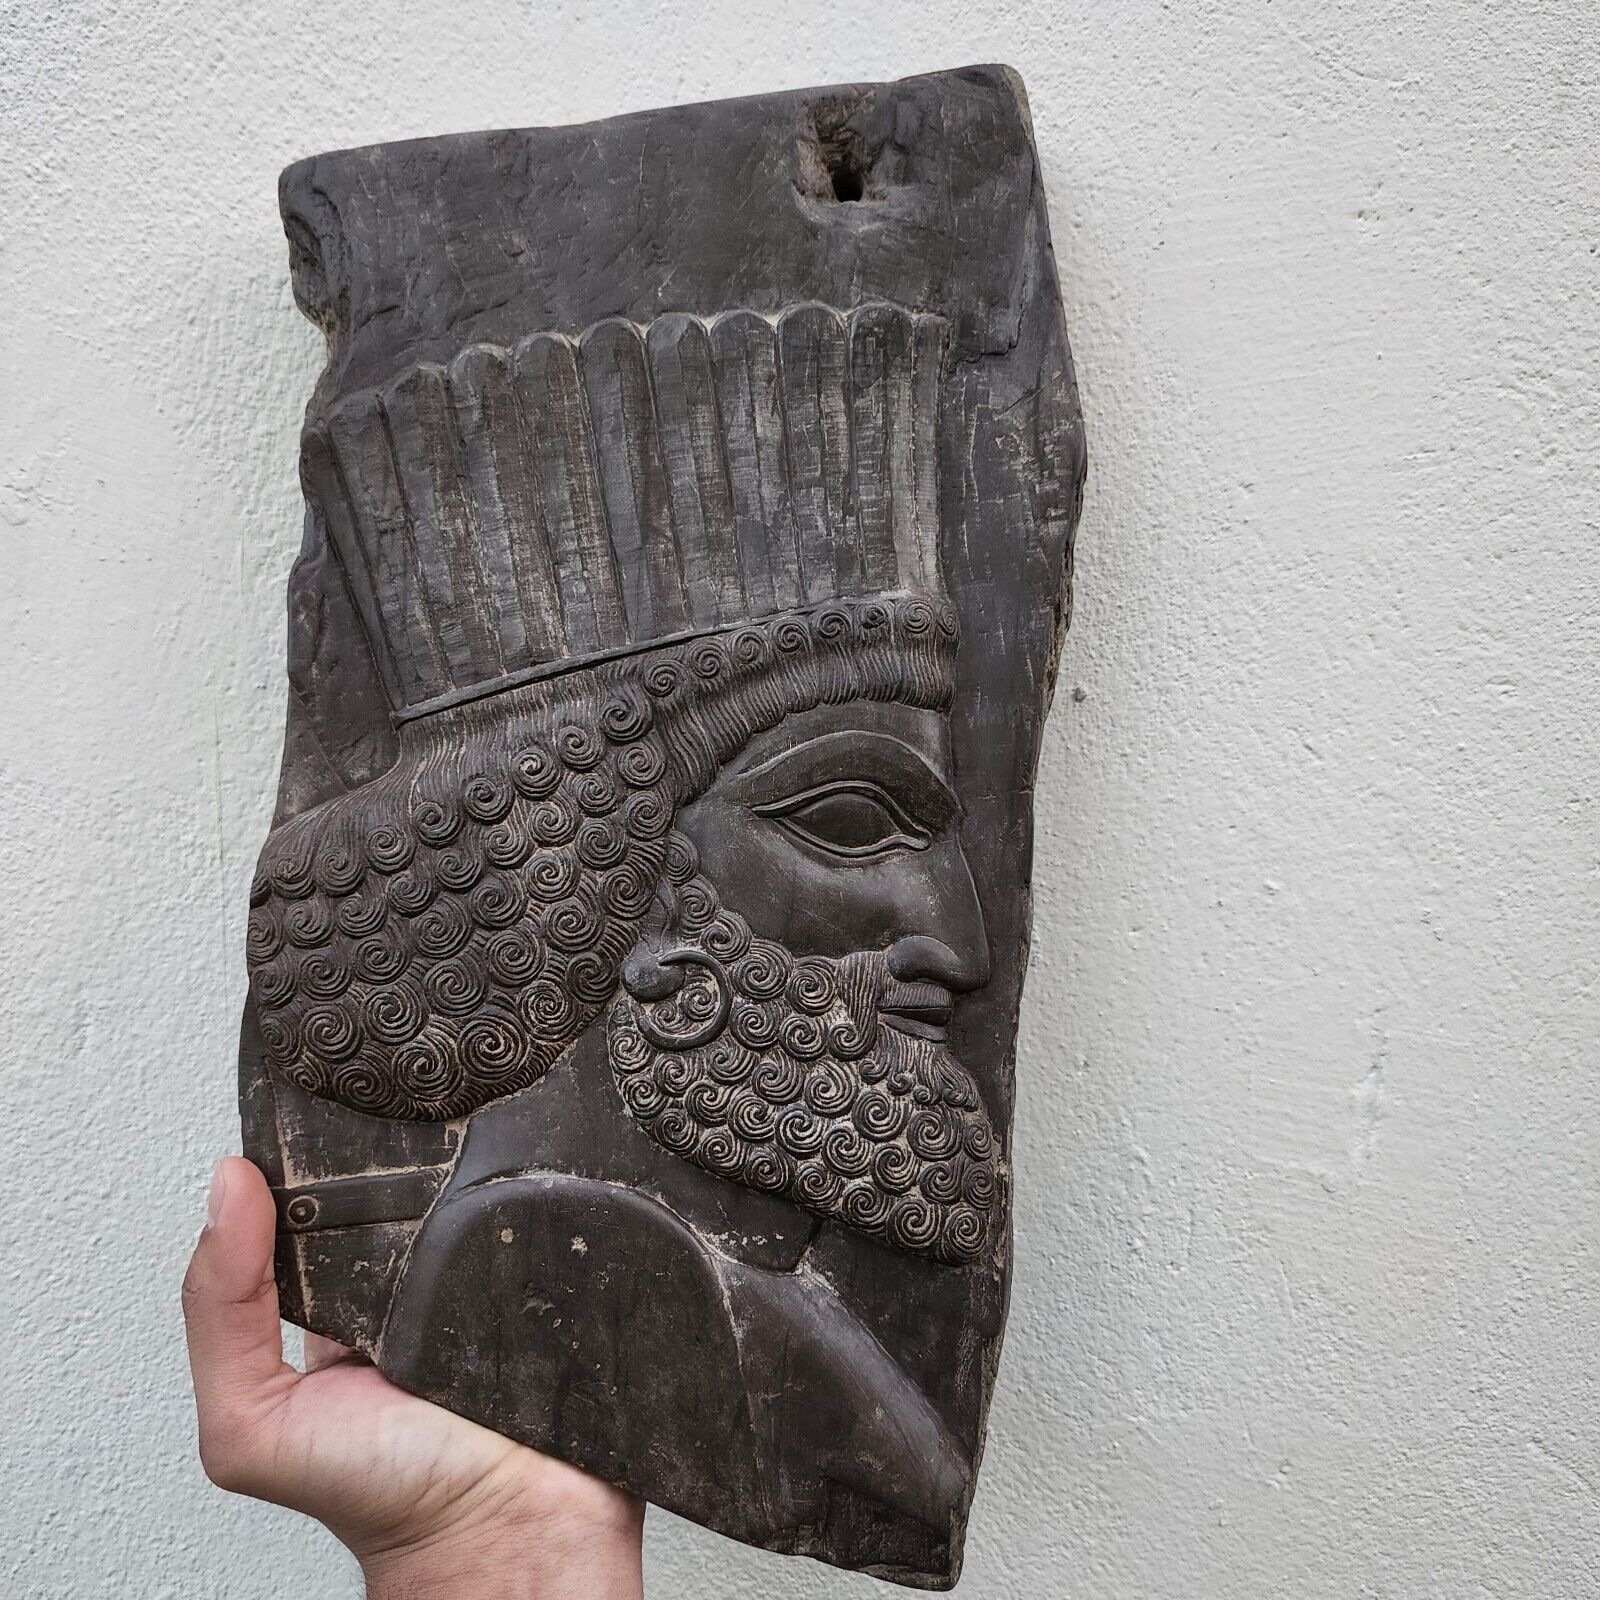 CIRCA AN IMPORTANT PERSEPOLIS ERA PERSIAN STONE CARVED PANEL FRAGMENT OF SOLDIER